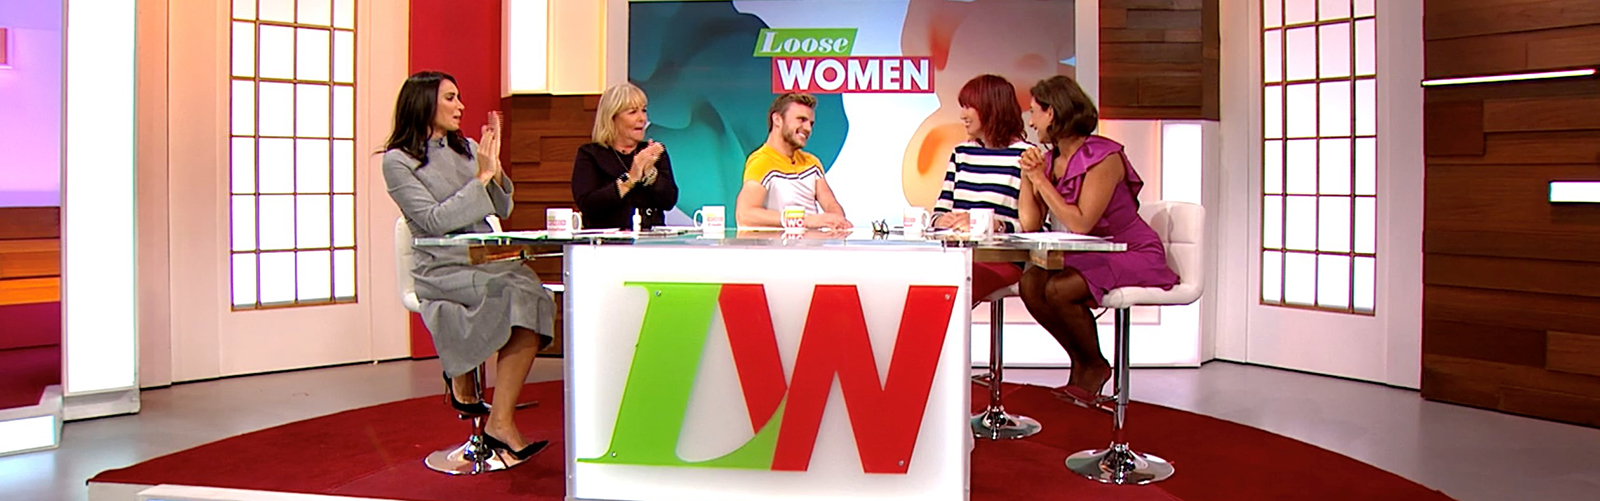 Image: Lee with the Loose Women panelists